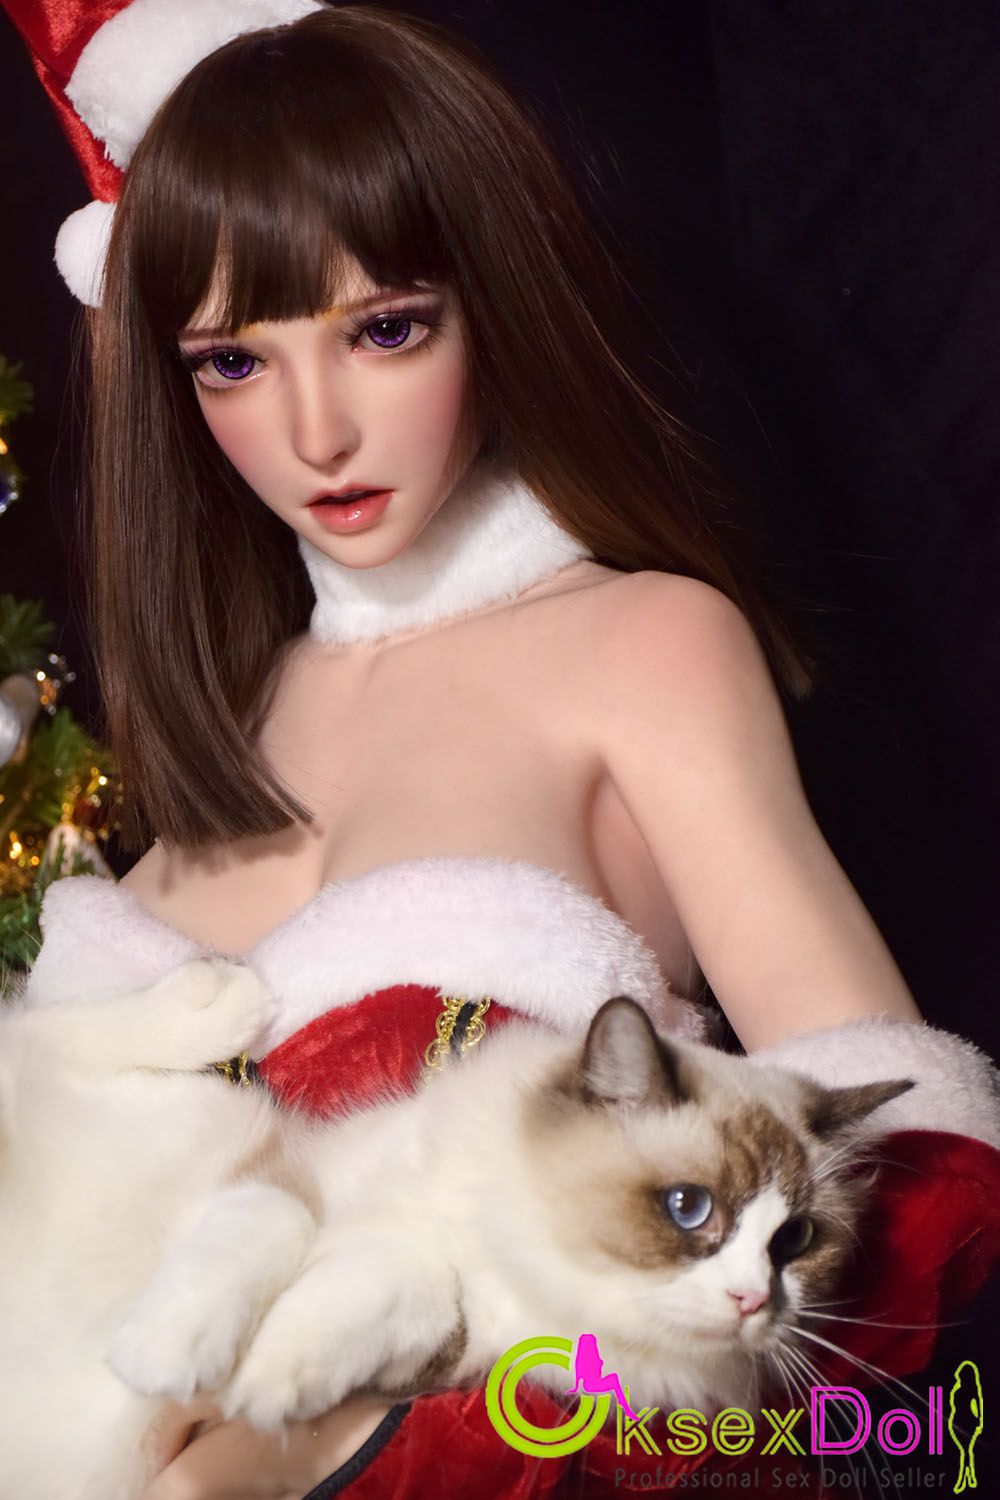 sex doll pics of Gallery of 『Brinley』